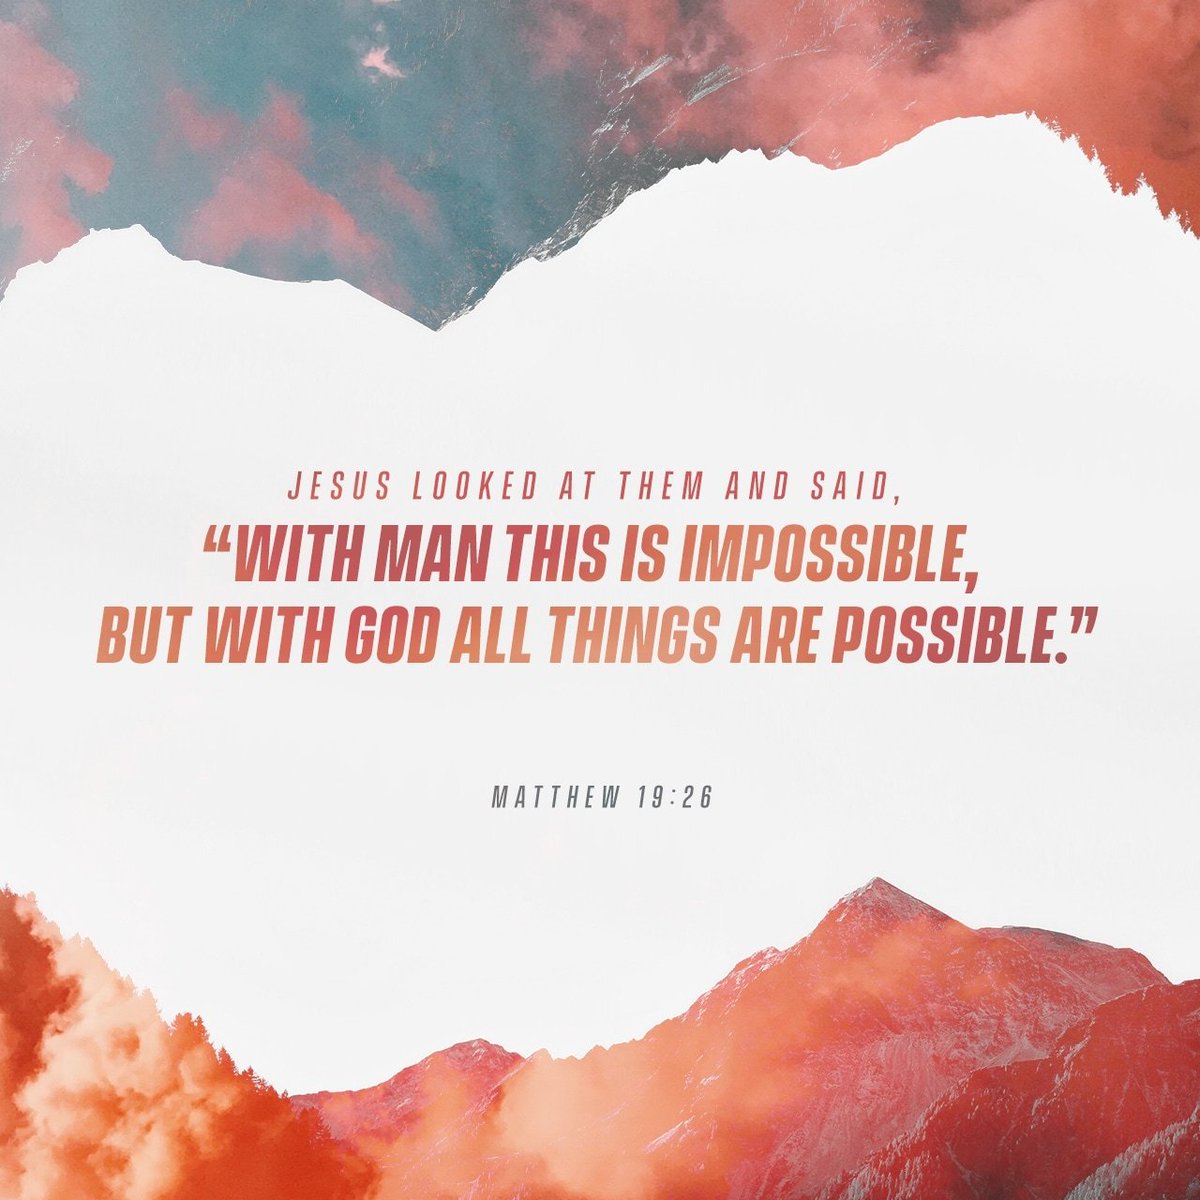 #christian #bible #faith #love #christianity #church #bibleverse #gospel #godisgood #worship #blessed #hope #truth #inspiration #influencer #christianinfluencer #biblia #christianquotes #instagood #photooftheday #trending #matthew19v26 #impossible #withgodallthingsarepossible